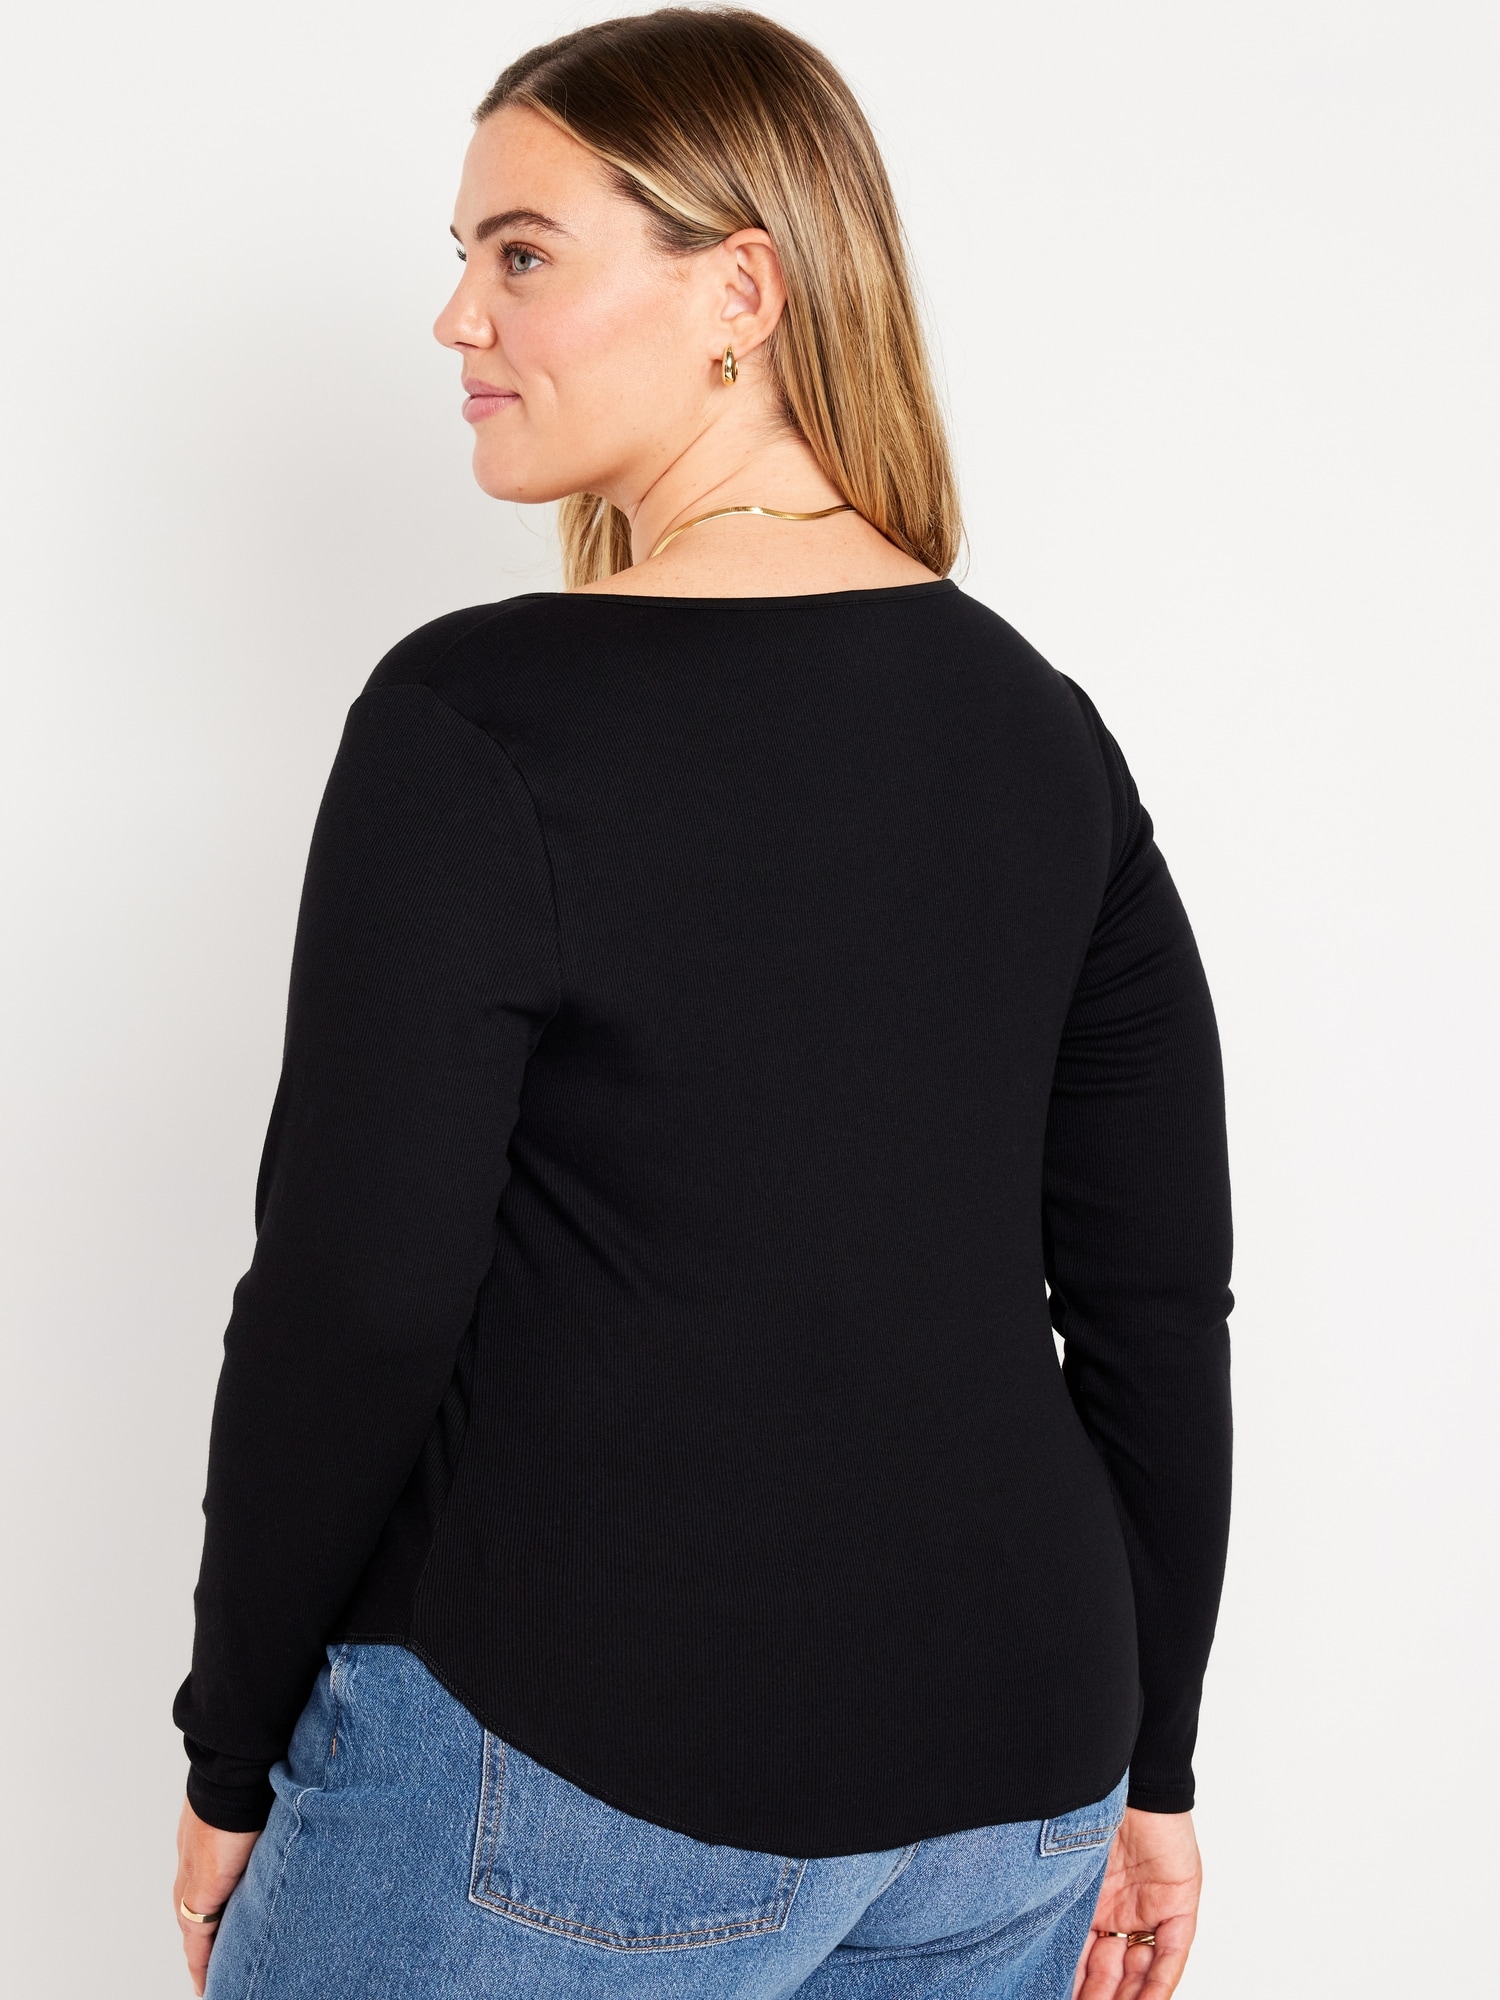 Fitted Long-Sleeve Women Rib-Knit Old | for Navy T-Shirt